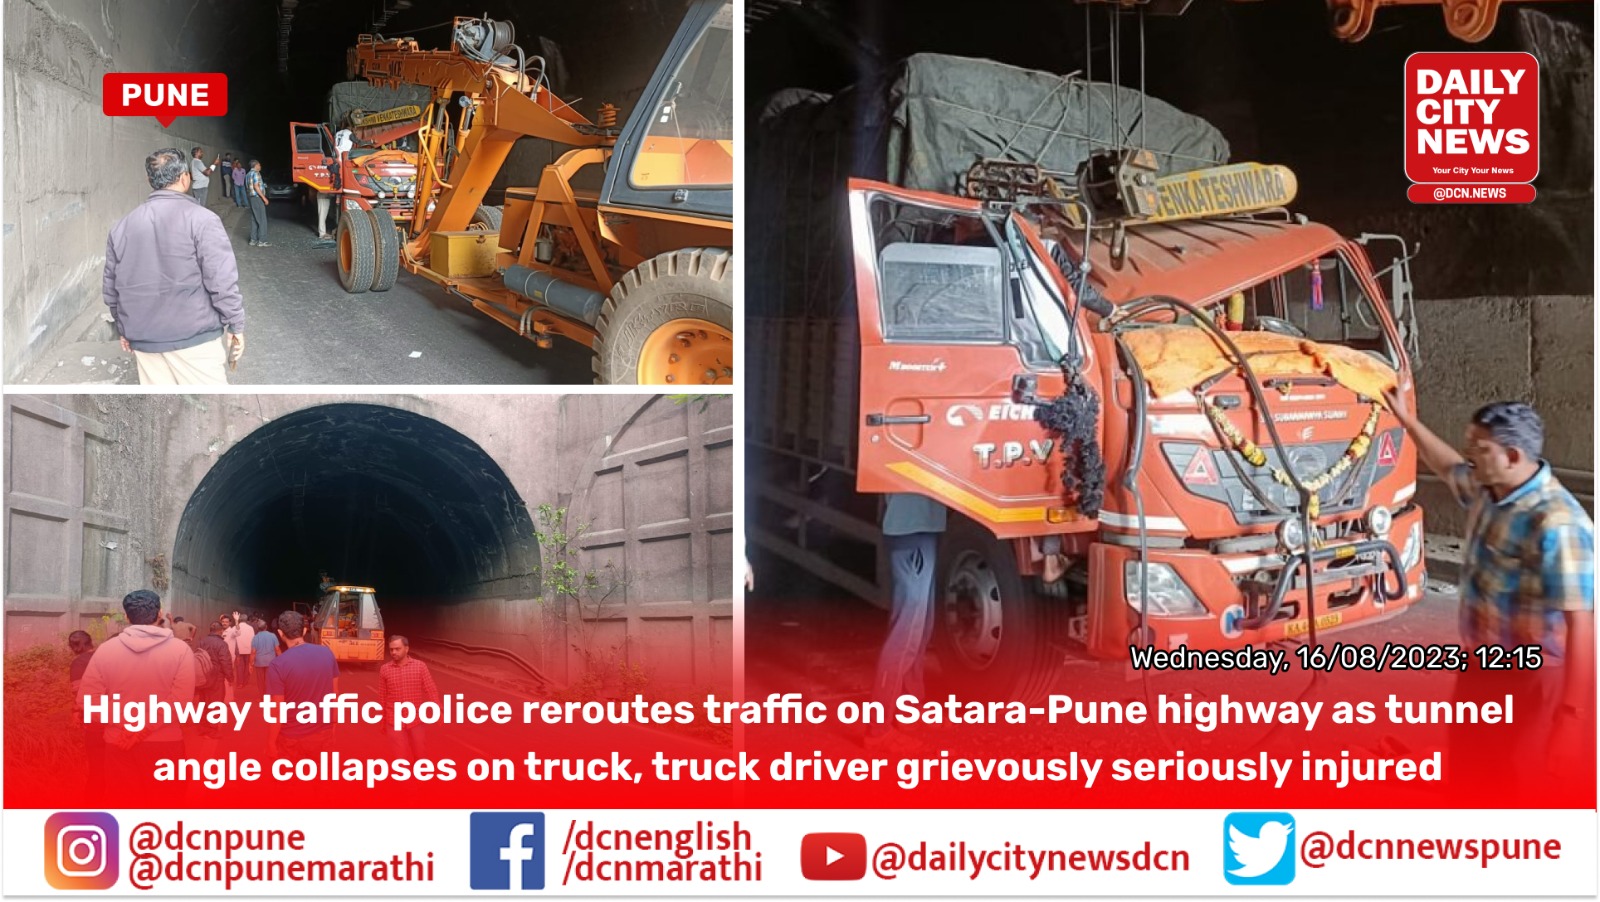 Highway traffic police reroutes traffic on Satara-Pune highway as tunnel angle collapses on truck, truck driver grievously seriously injured